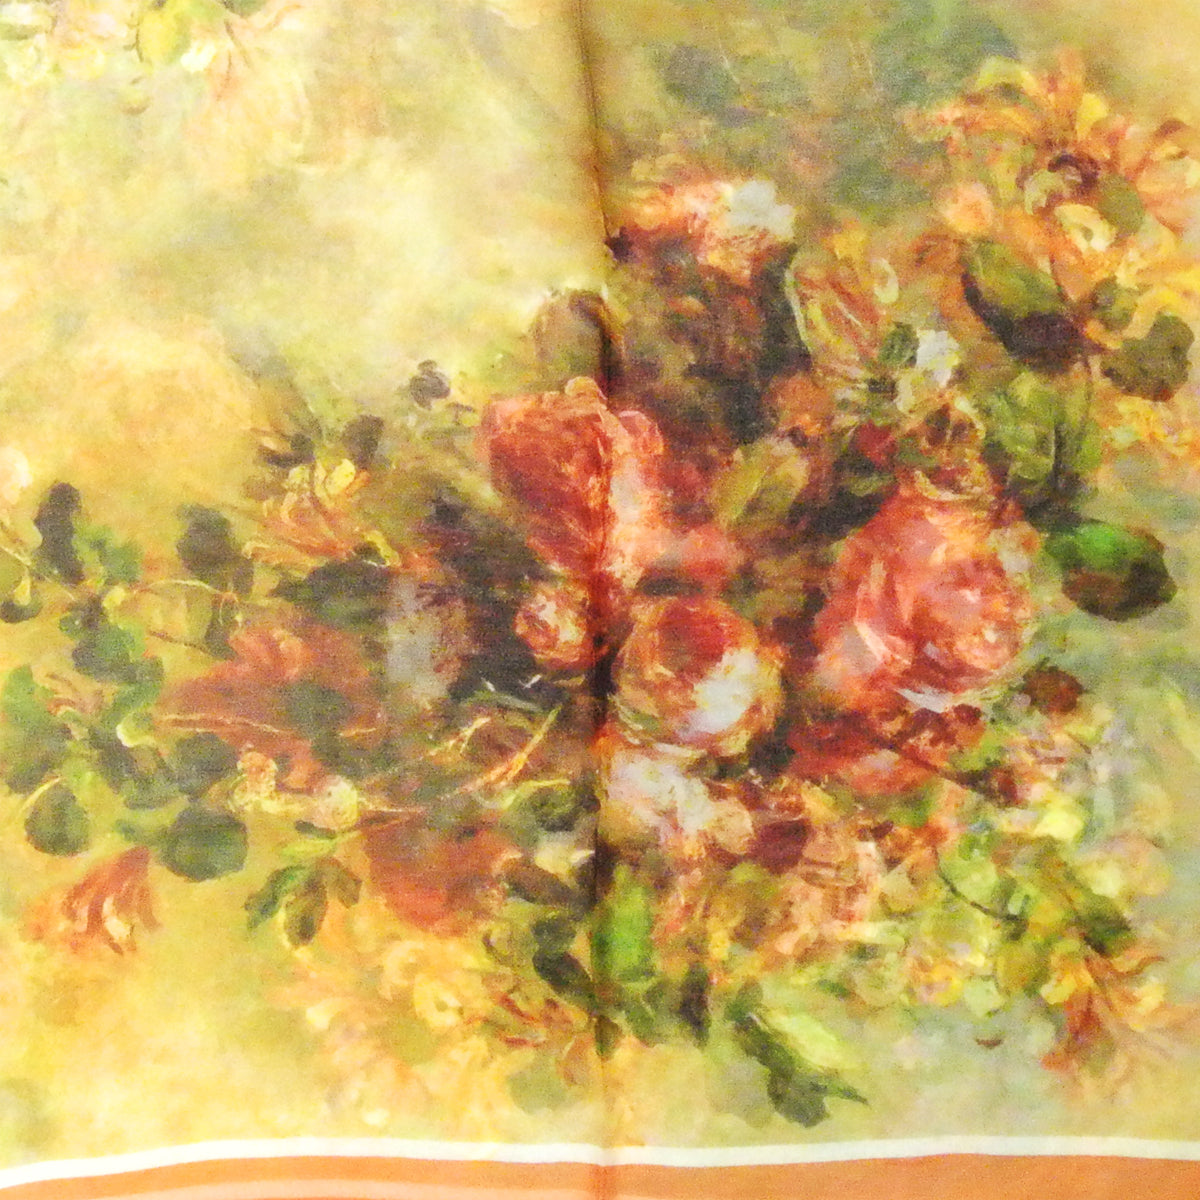 Wrapables 100% Mulberry Silk Floral Painting Square Scarf